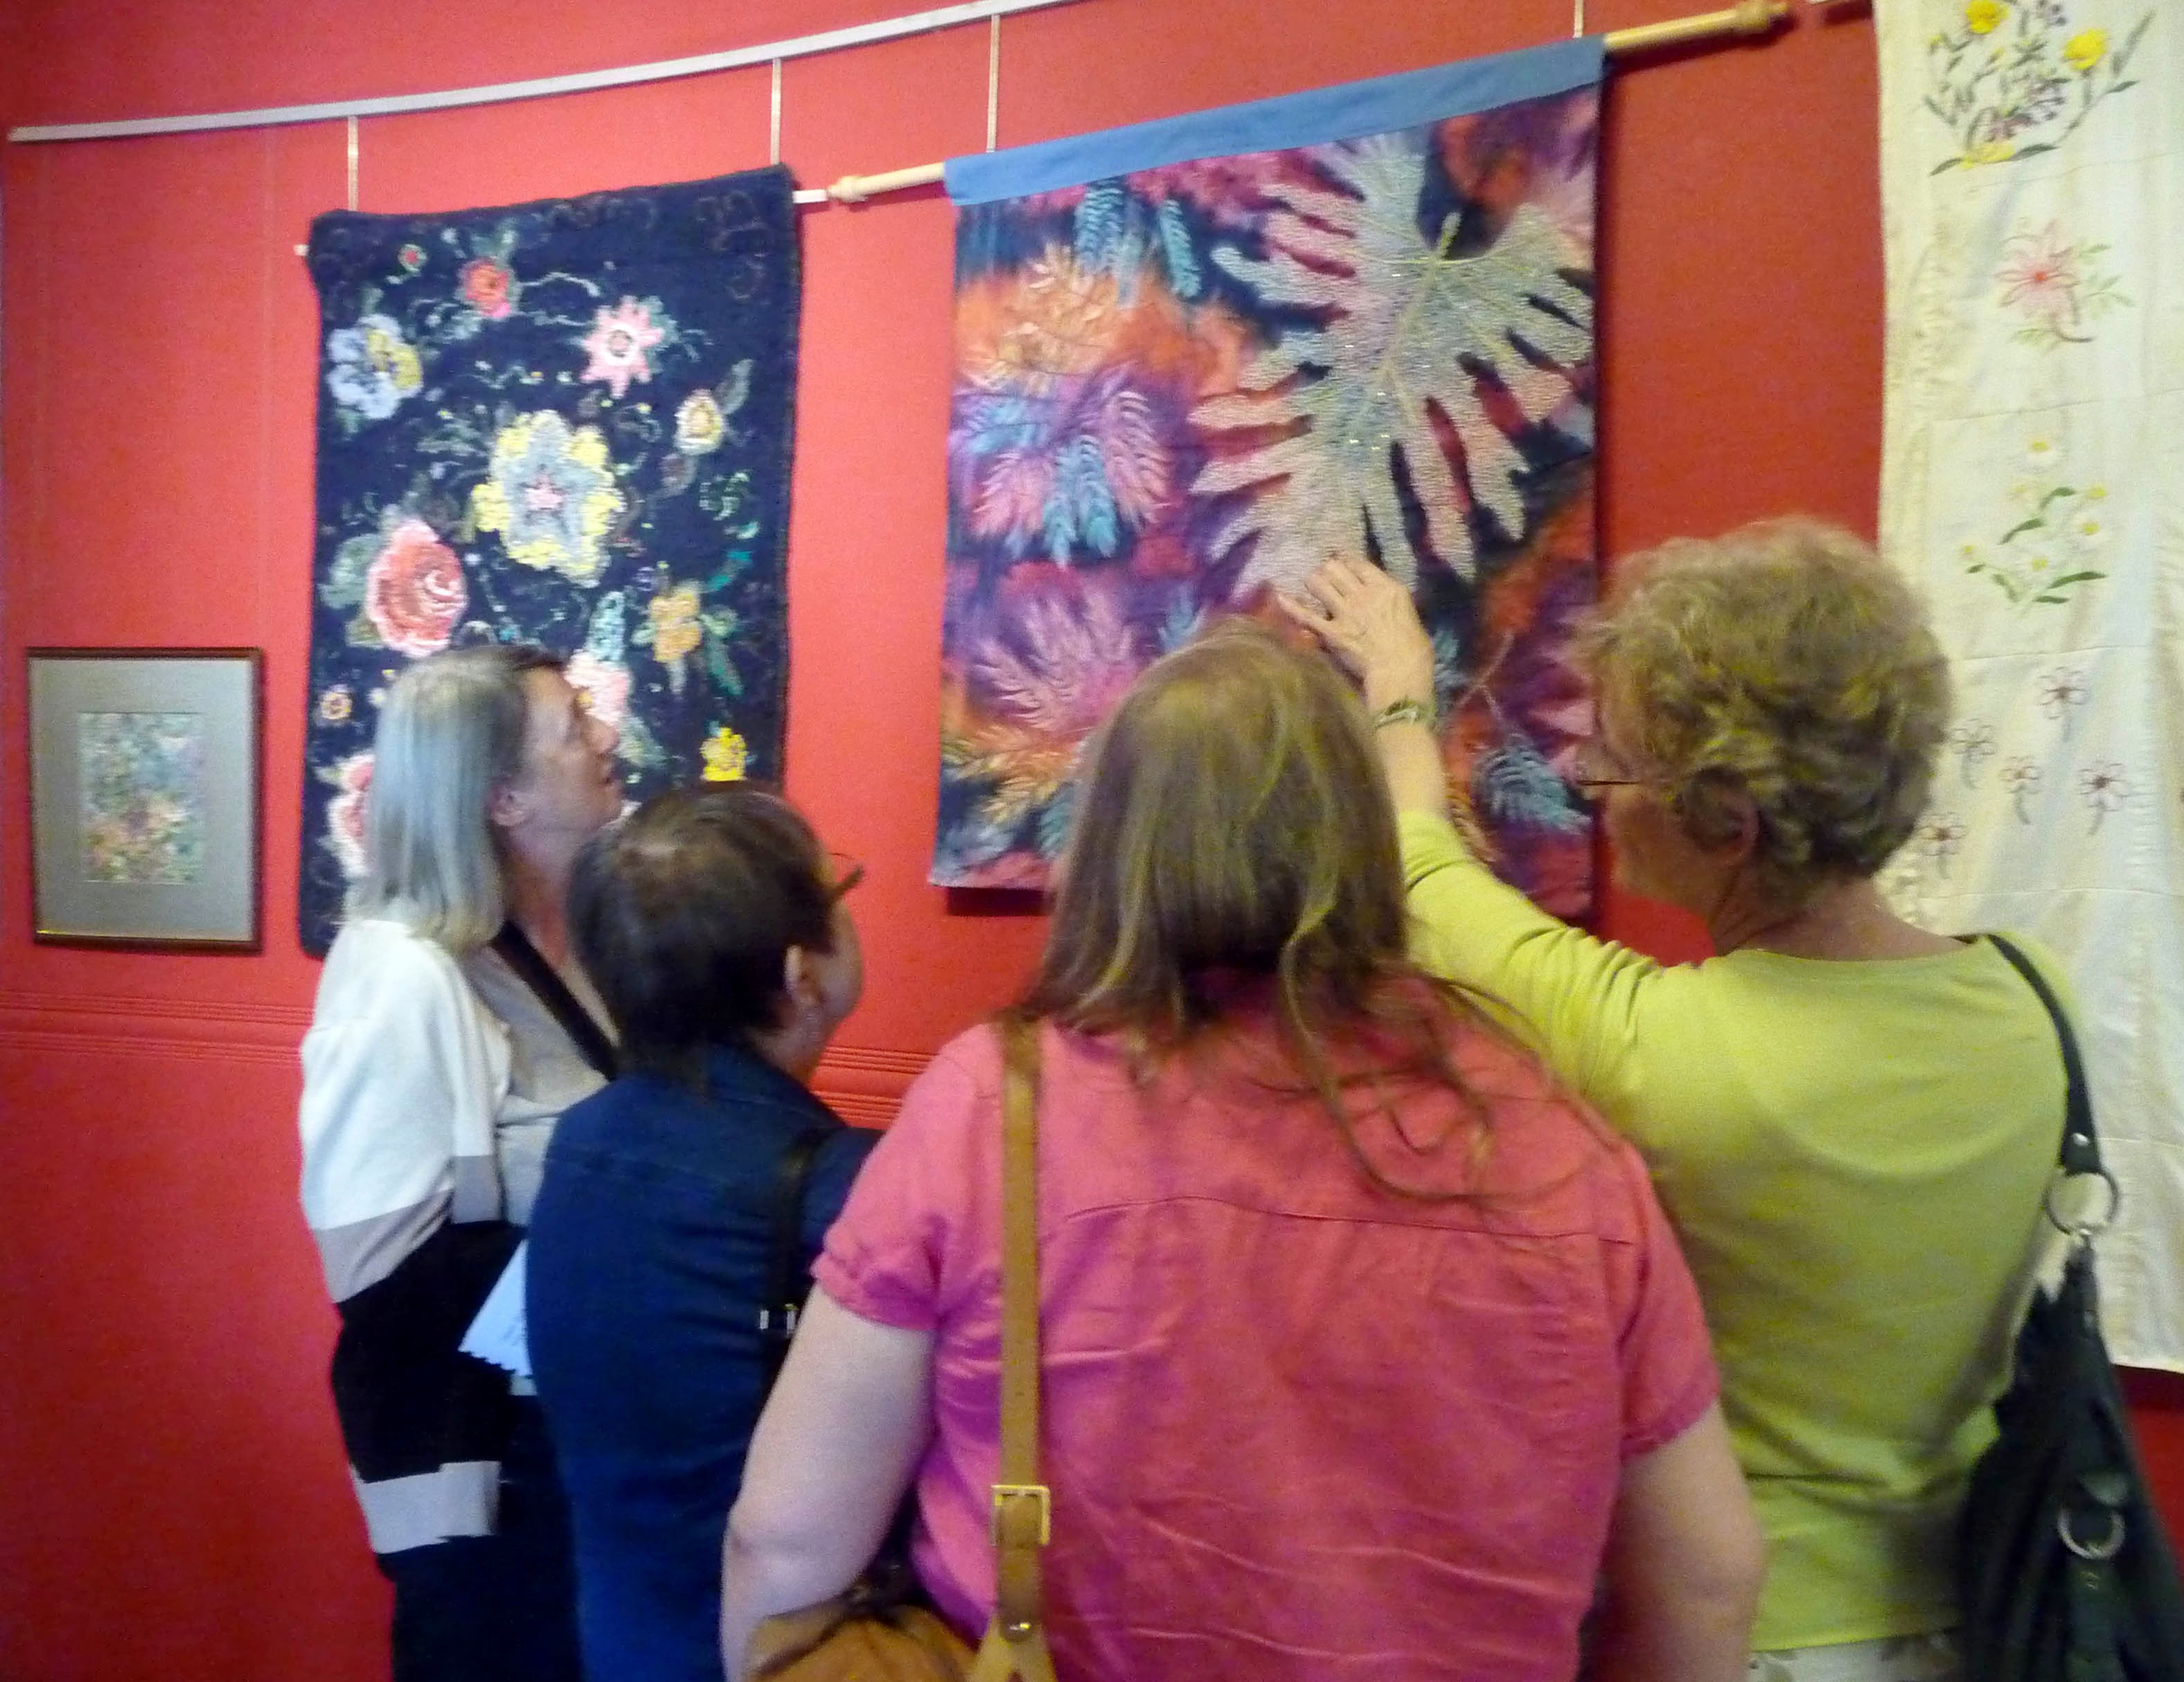 'Meet the Artists' day at GROWTH exhibition, Victoria Gallery, 2014